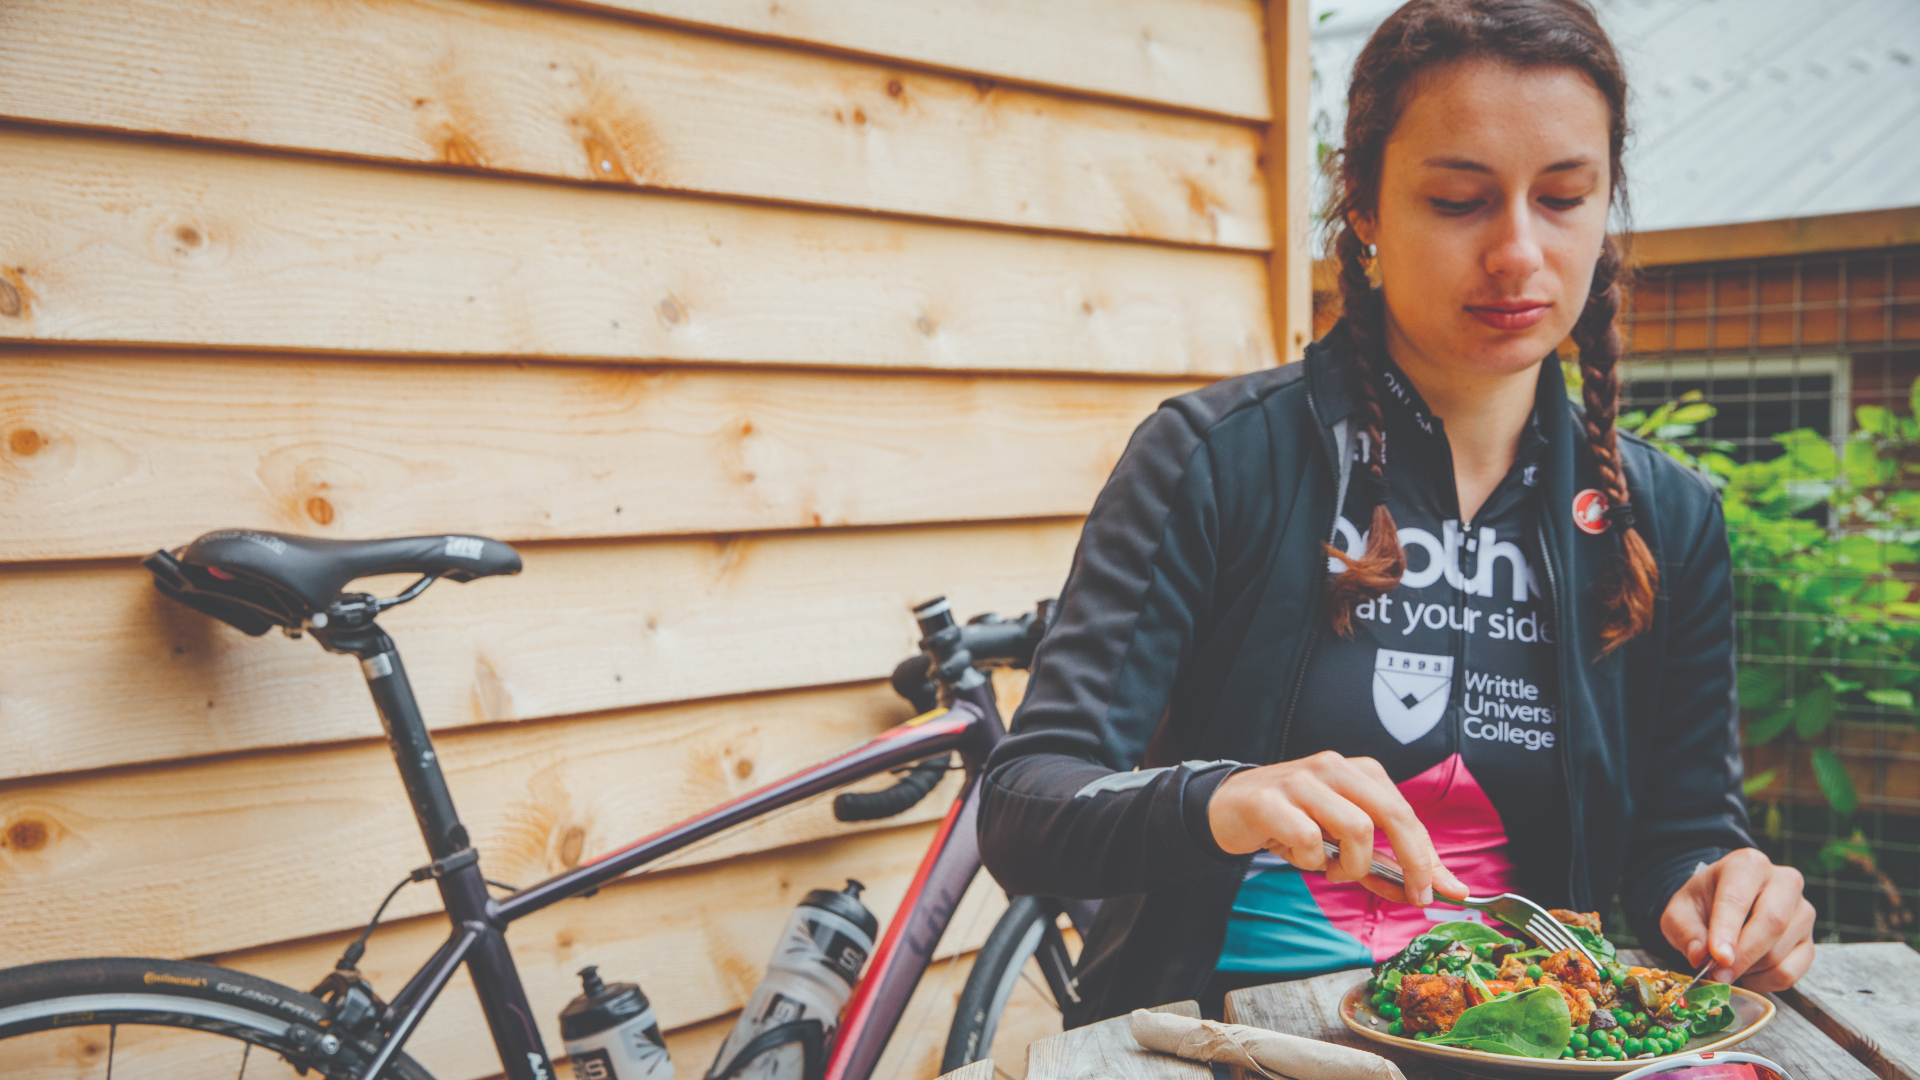 What is the best way to calculate your calorie intake during a cycling ride? 